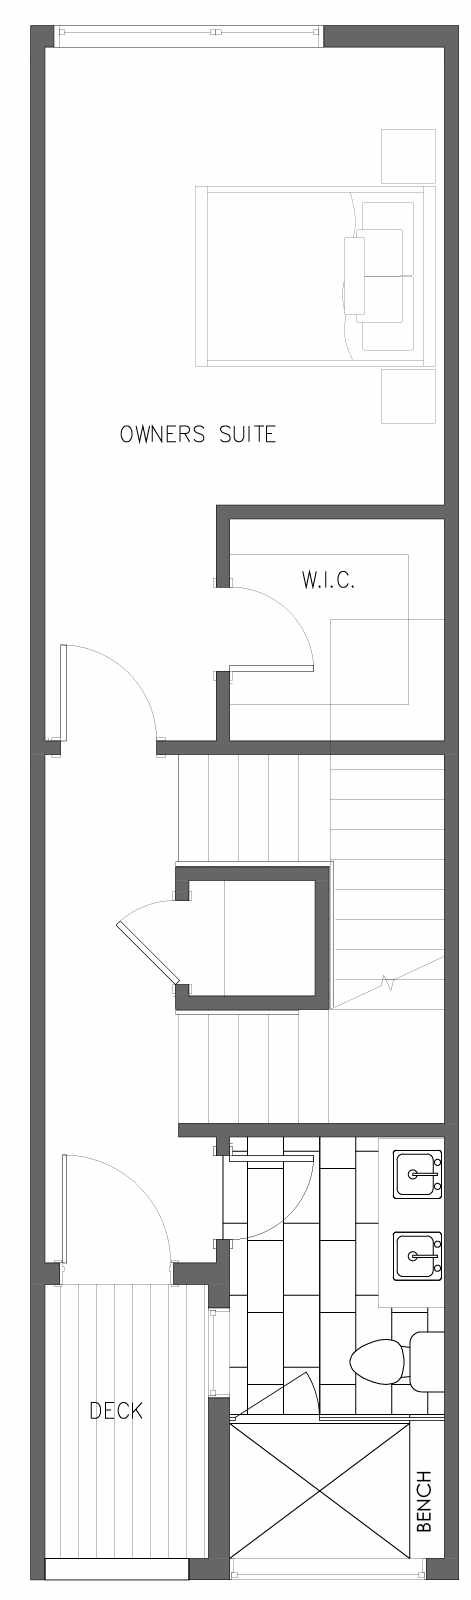 Third Floor Plan of 5610 NE 60th St., One of the Kendal Townhomes in Windermere by Isola Homes